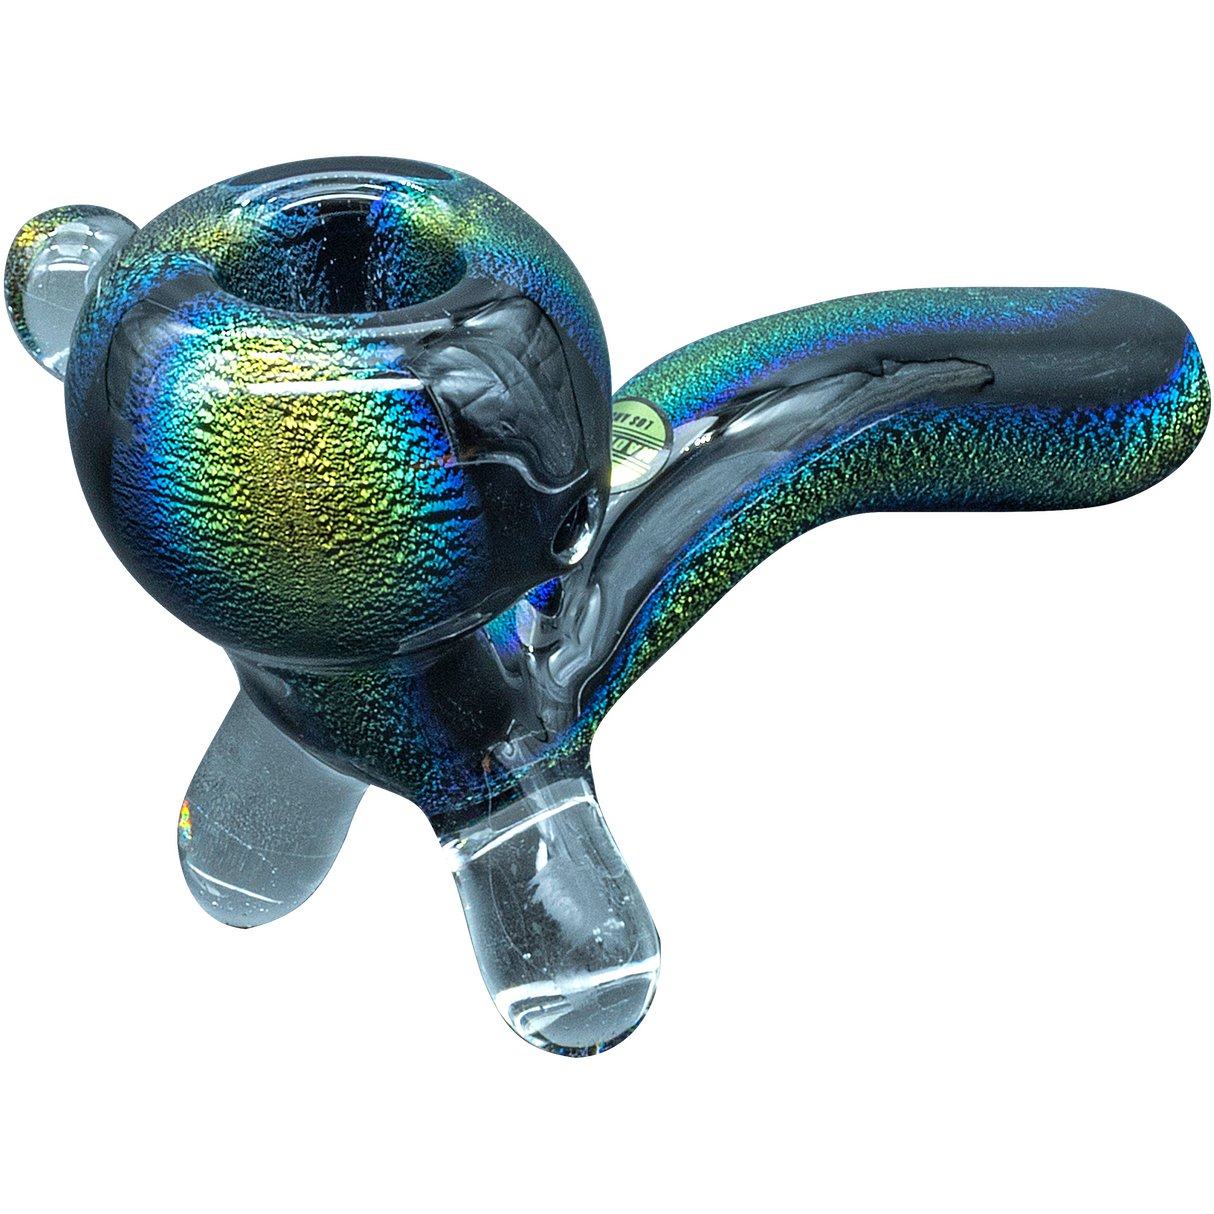 LA Pipes "The Galaxy" Dichroic Glass Sherlock Pipe, 4.35" USA-Made, Angled Side View